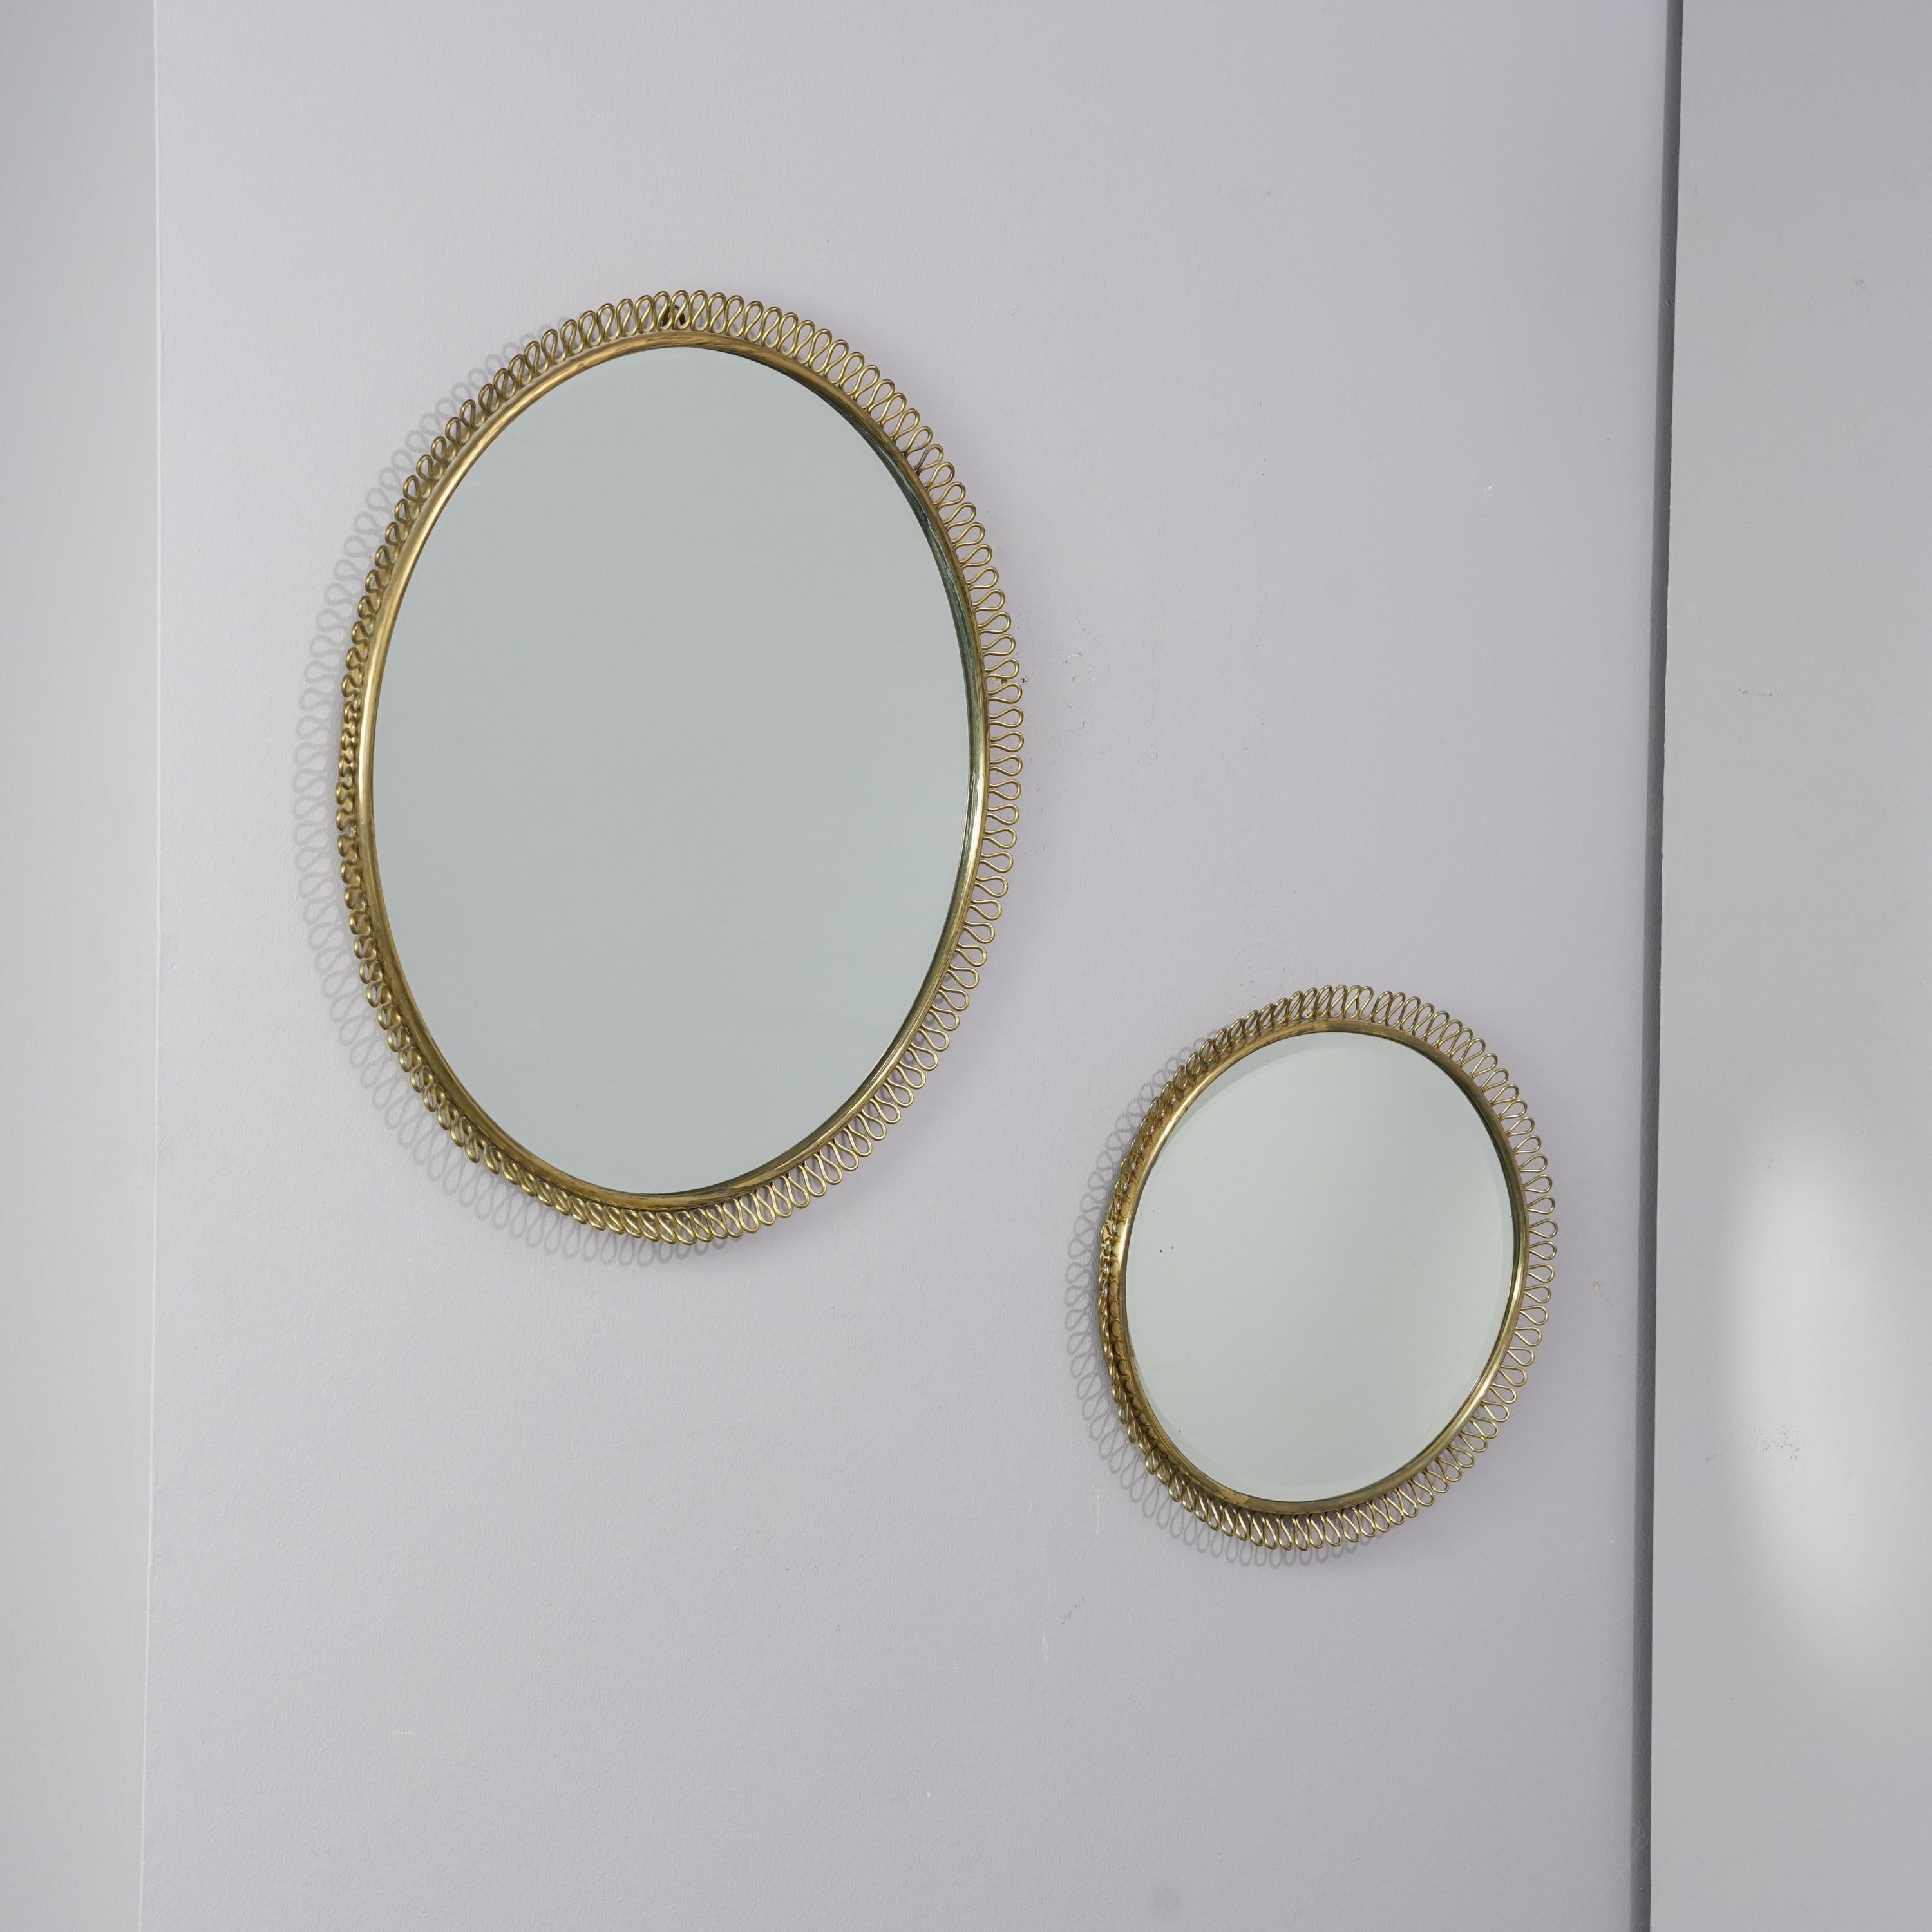 Exceedingly rare wall mirrors designed by Antti Hakkarainen for Taidetakomo Hakkarainen, stamp on the bottom, circa 1930s, brass, very good condition, minor wear consistent with age and use. The mirrors are sold as a set. 

Measurements for the